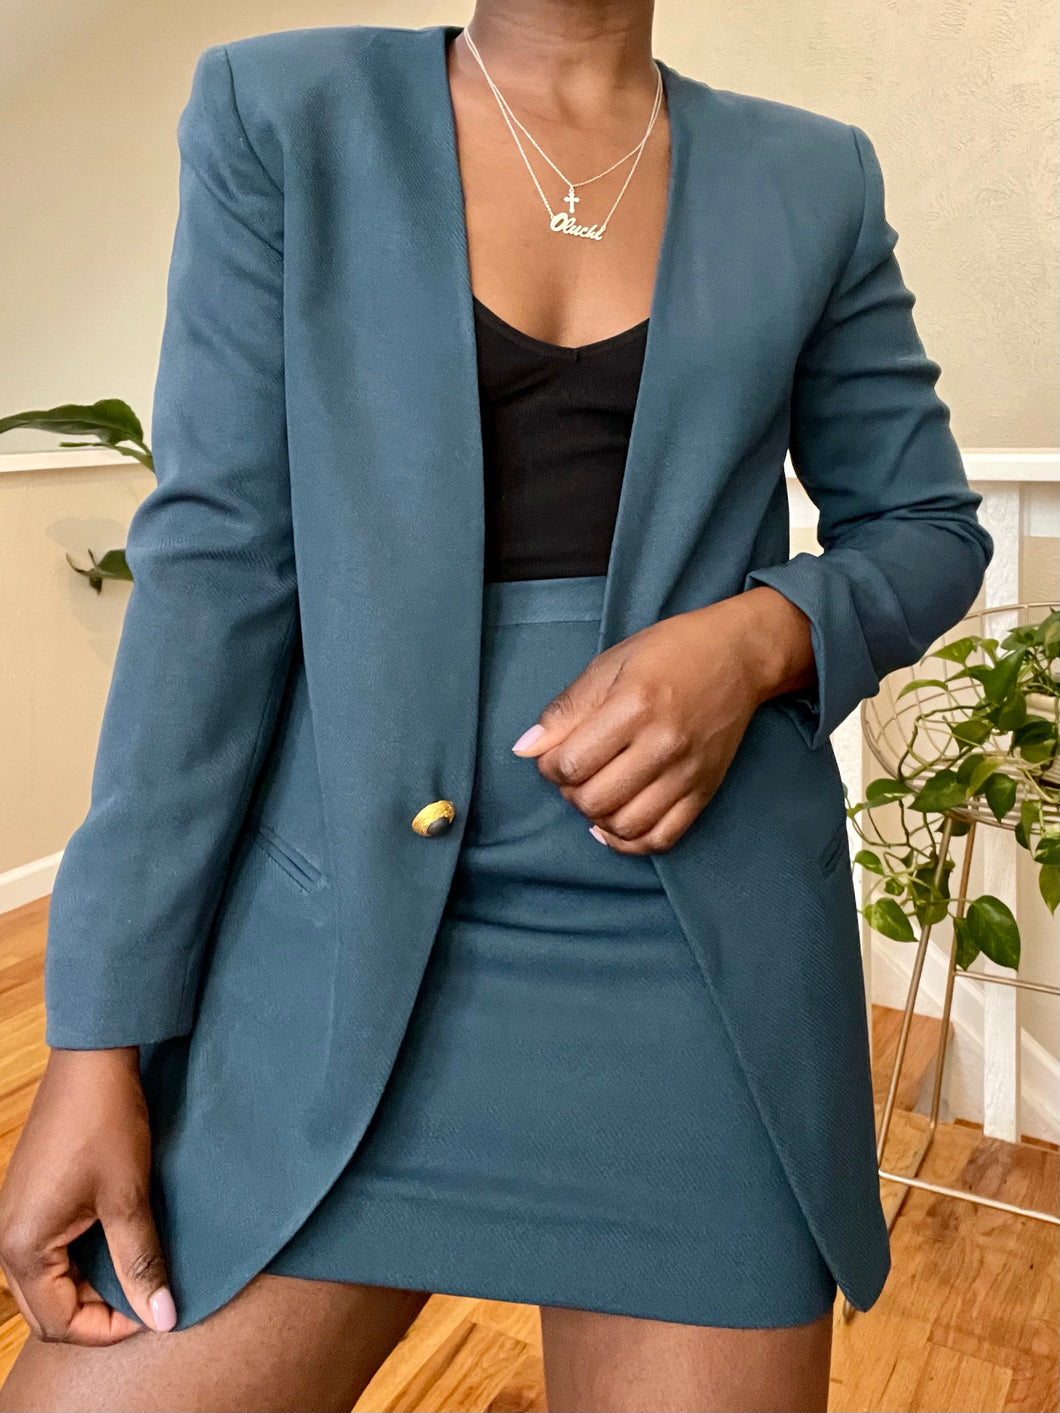 teal skirt suit